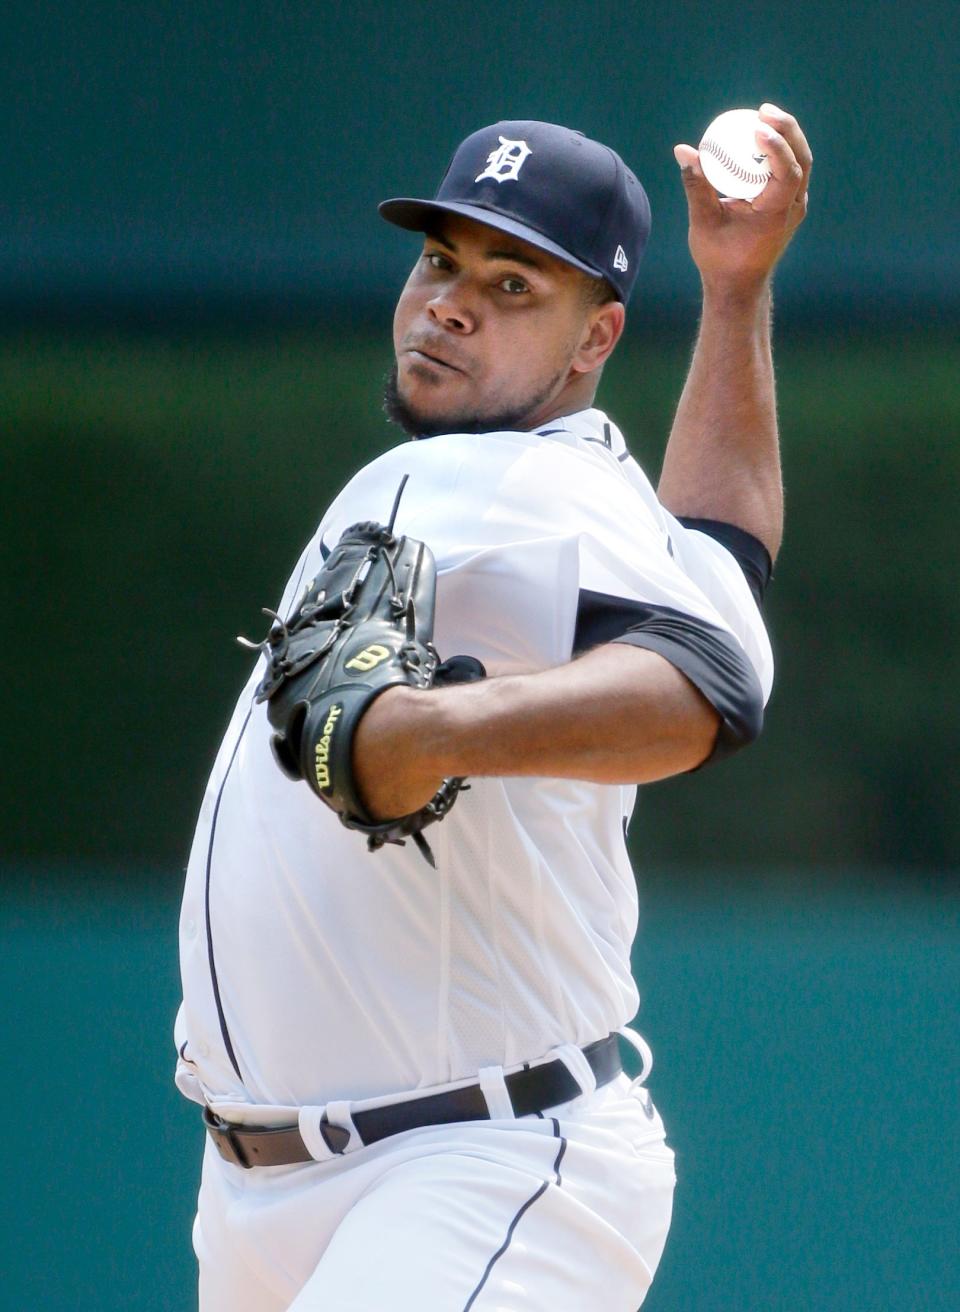 Detroit Tigers starter Wily Peralta pitches against the Minnesota Twins during the third inning of a baseball game Sunday, July 18, 2021, in Detroit.